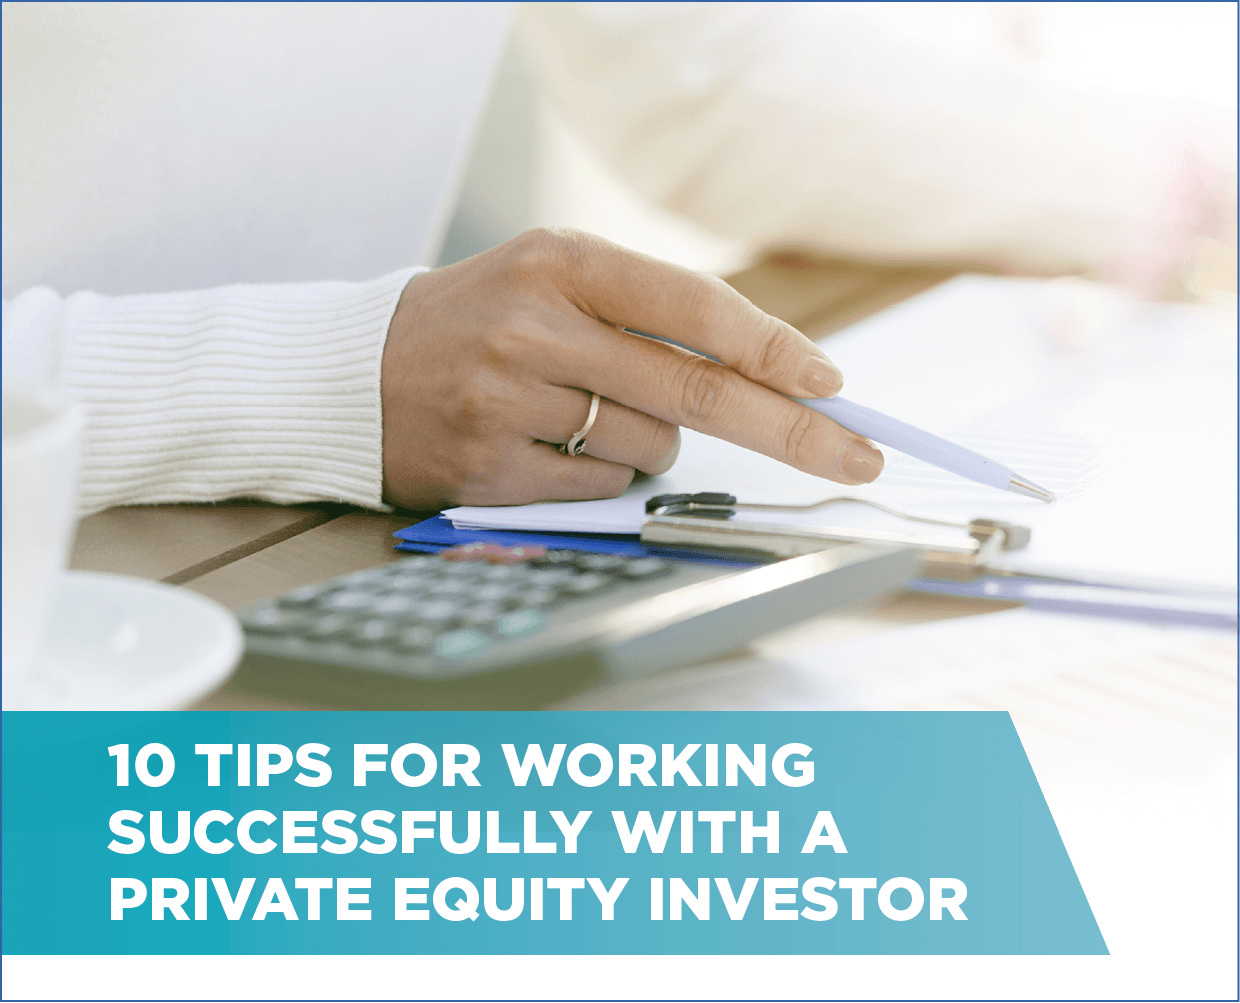 10 Tips for working successfully with a private equity investor